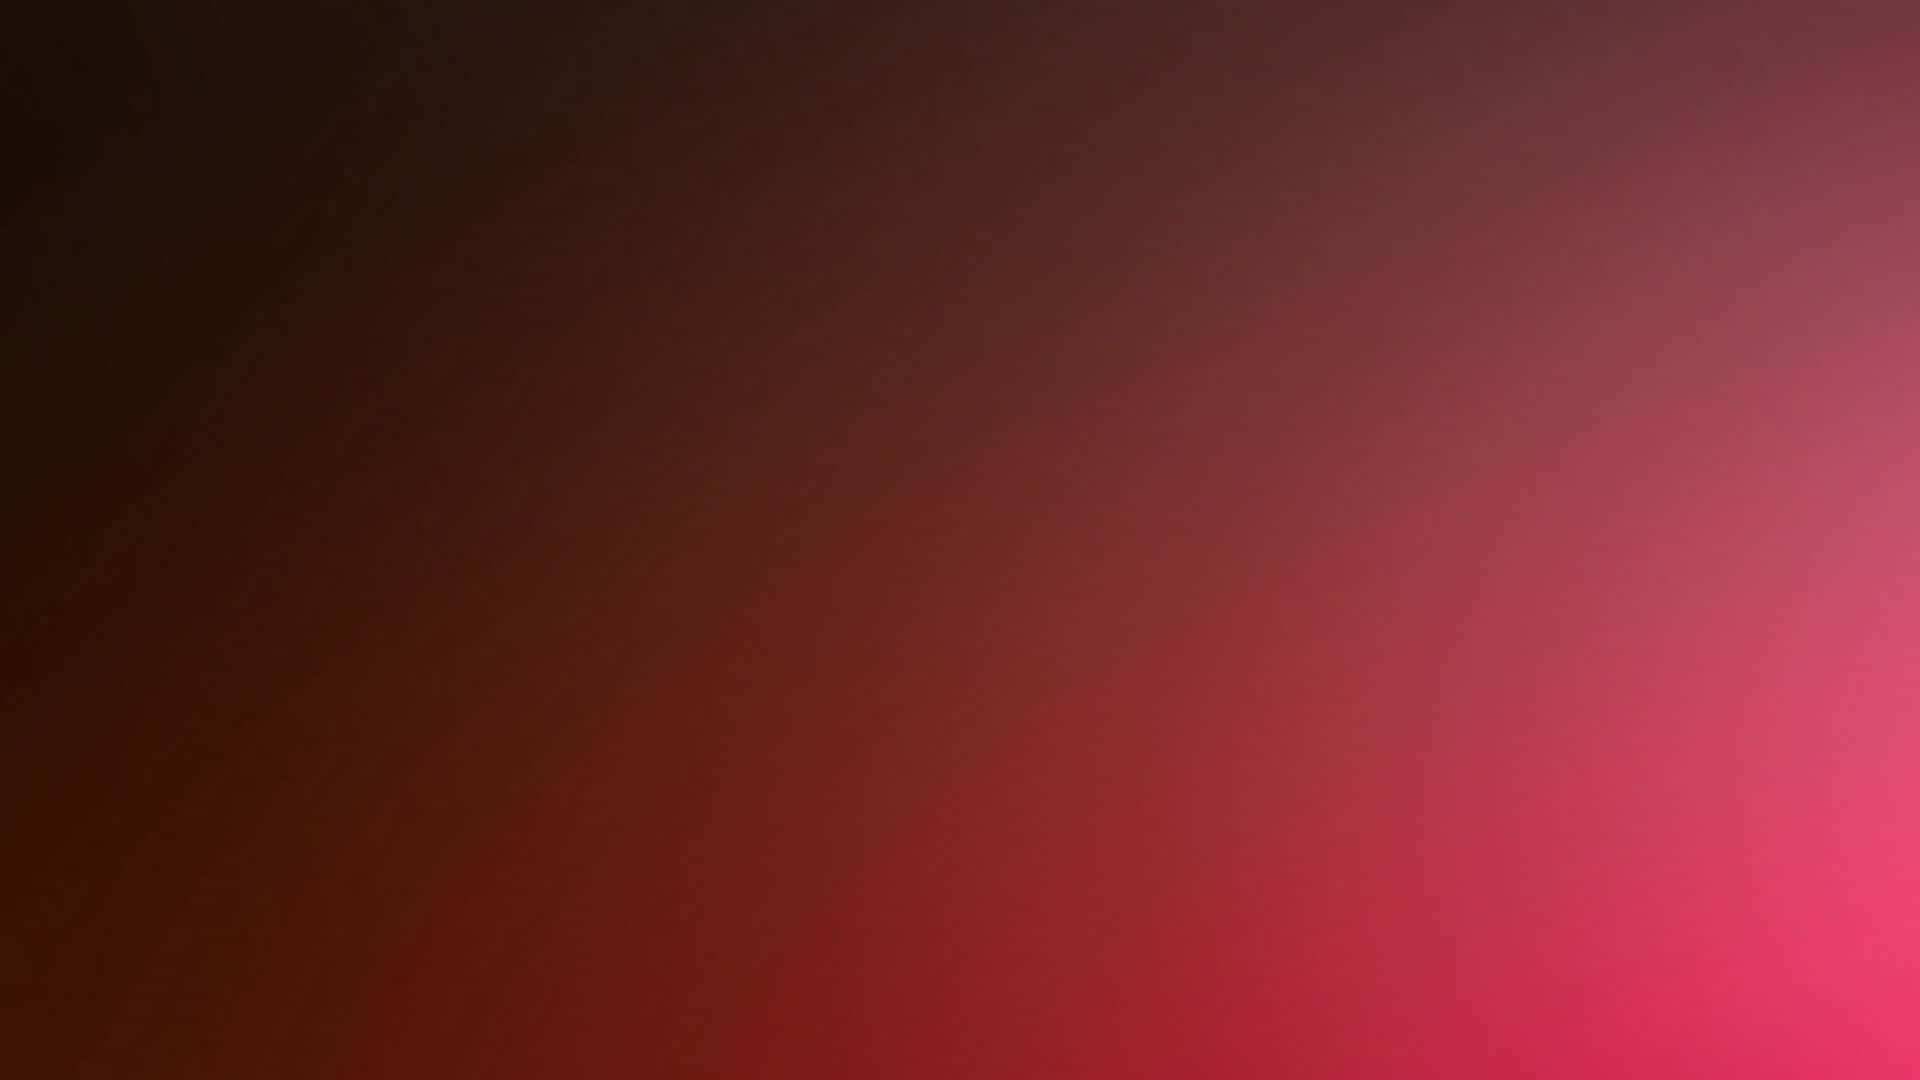 100+] Red Ombre Backgrounds